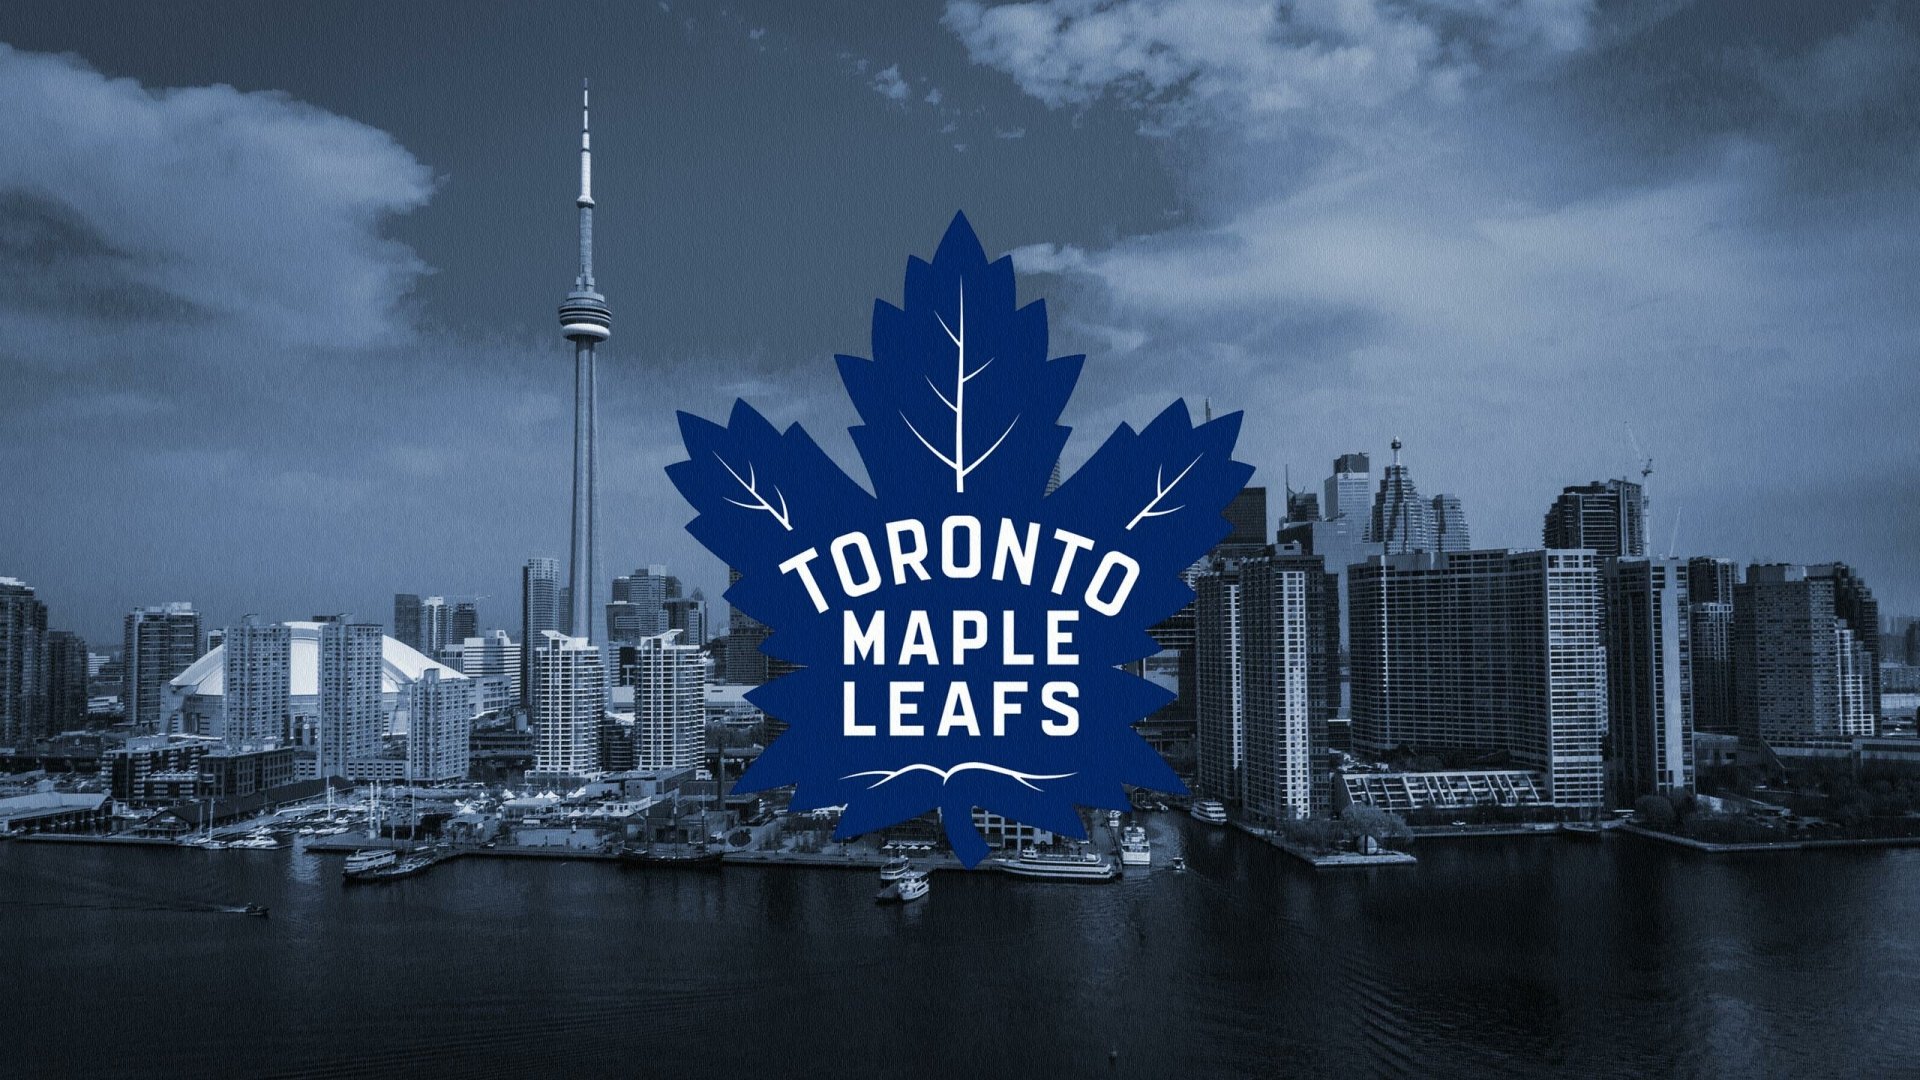 sports wallpaper for iPhone and Android Toronto new logo  Toronto maple  leafs wallpaper, Maple leafs wallpaper, Maple leafs hockey